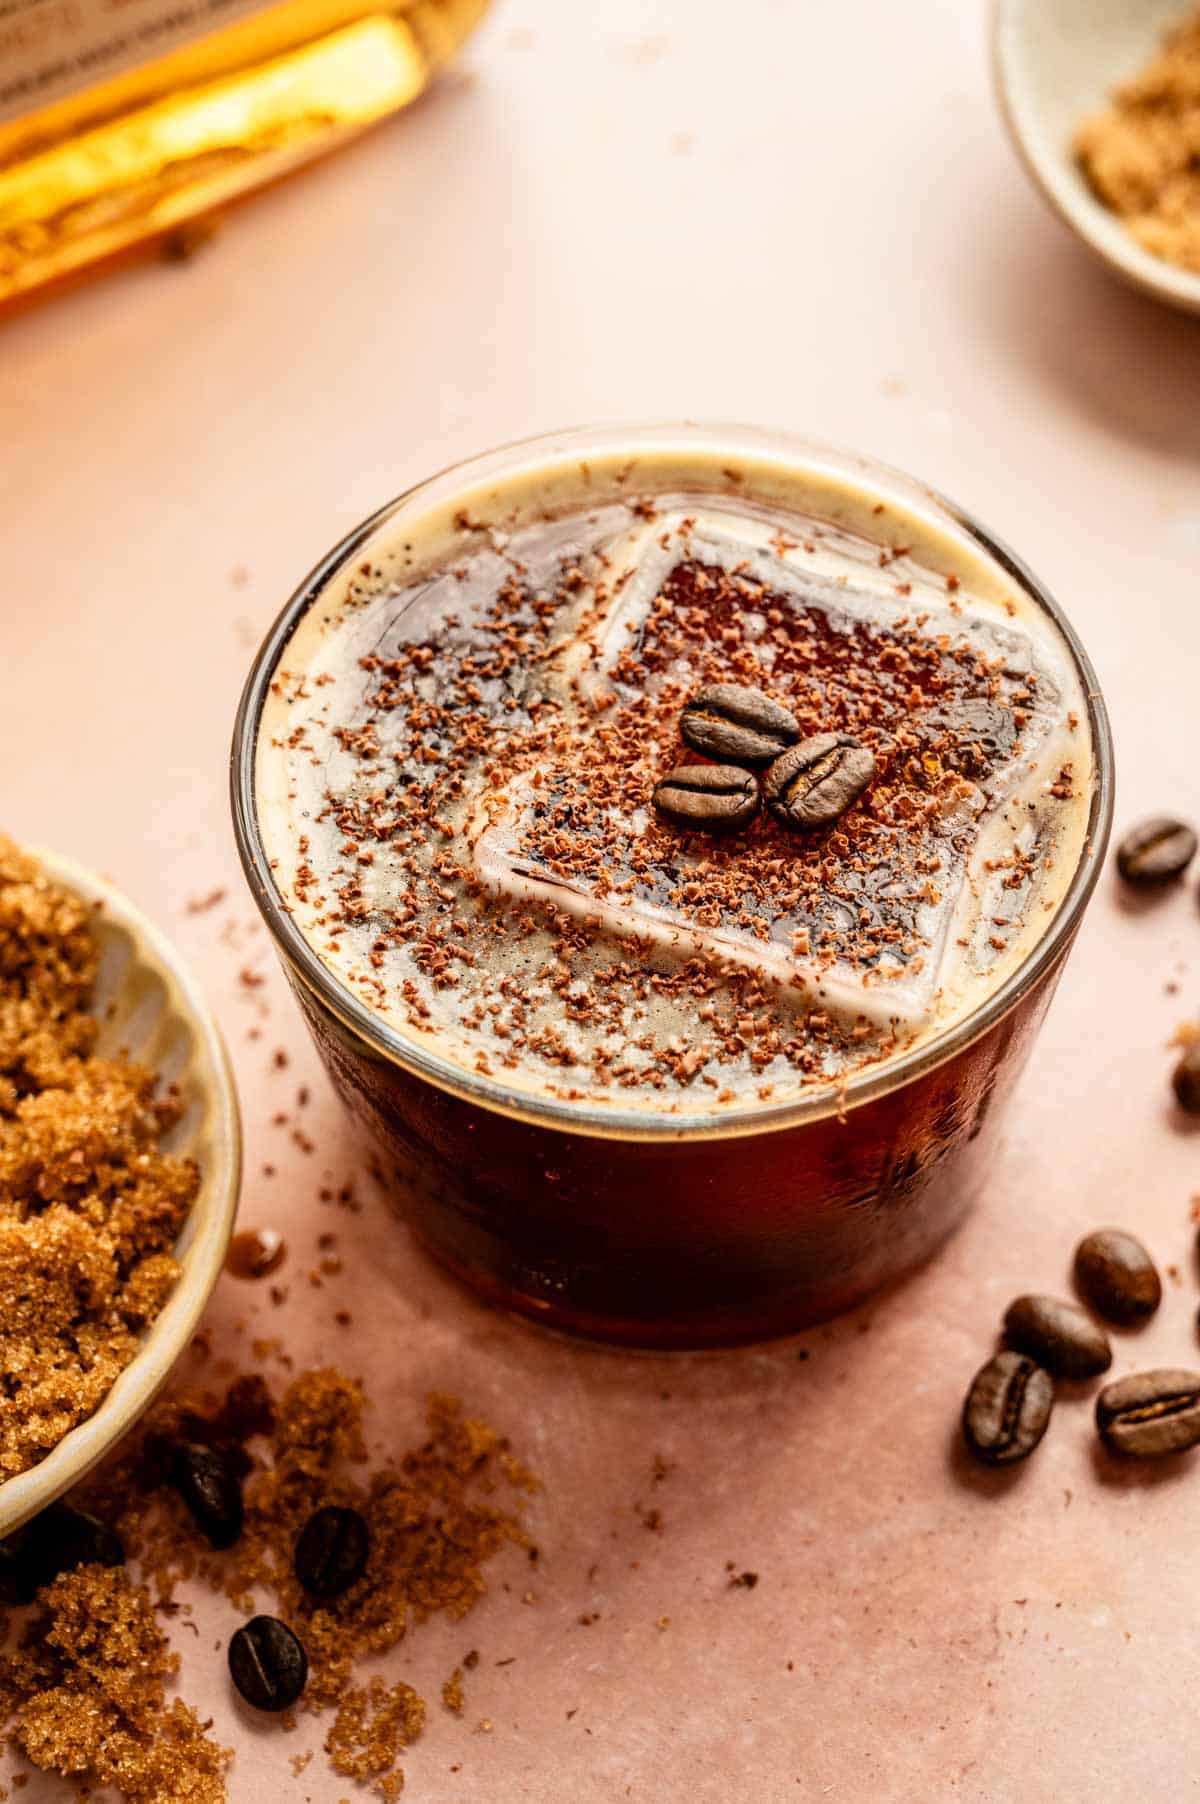 The cocktail has been garnished with chocolate shavings and espresso beans.